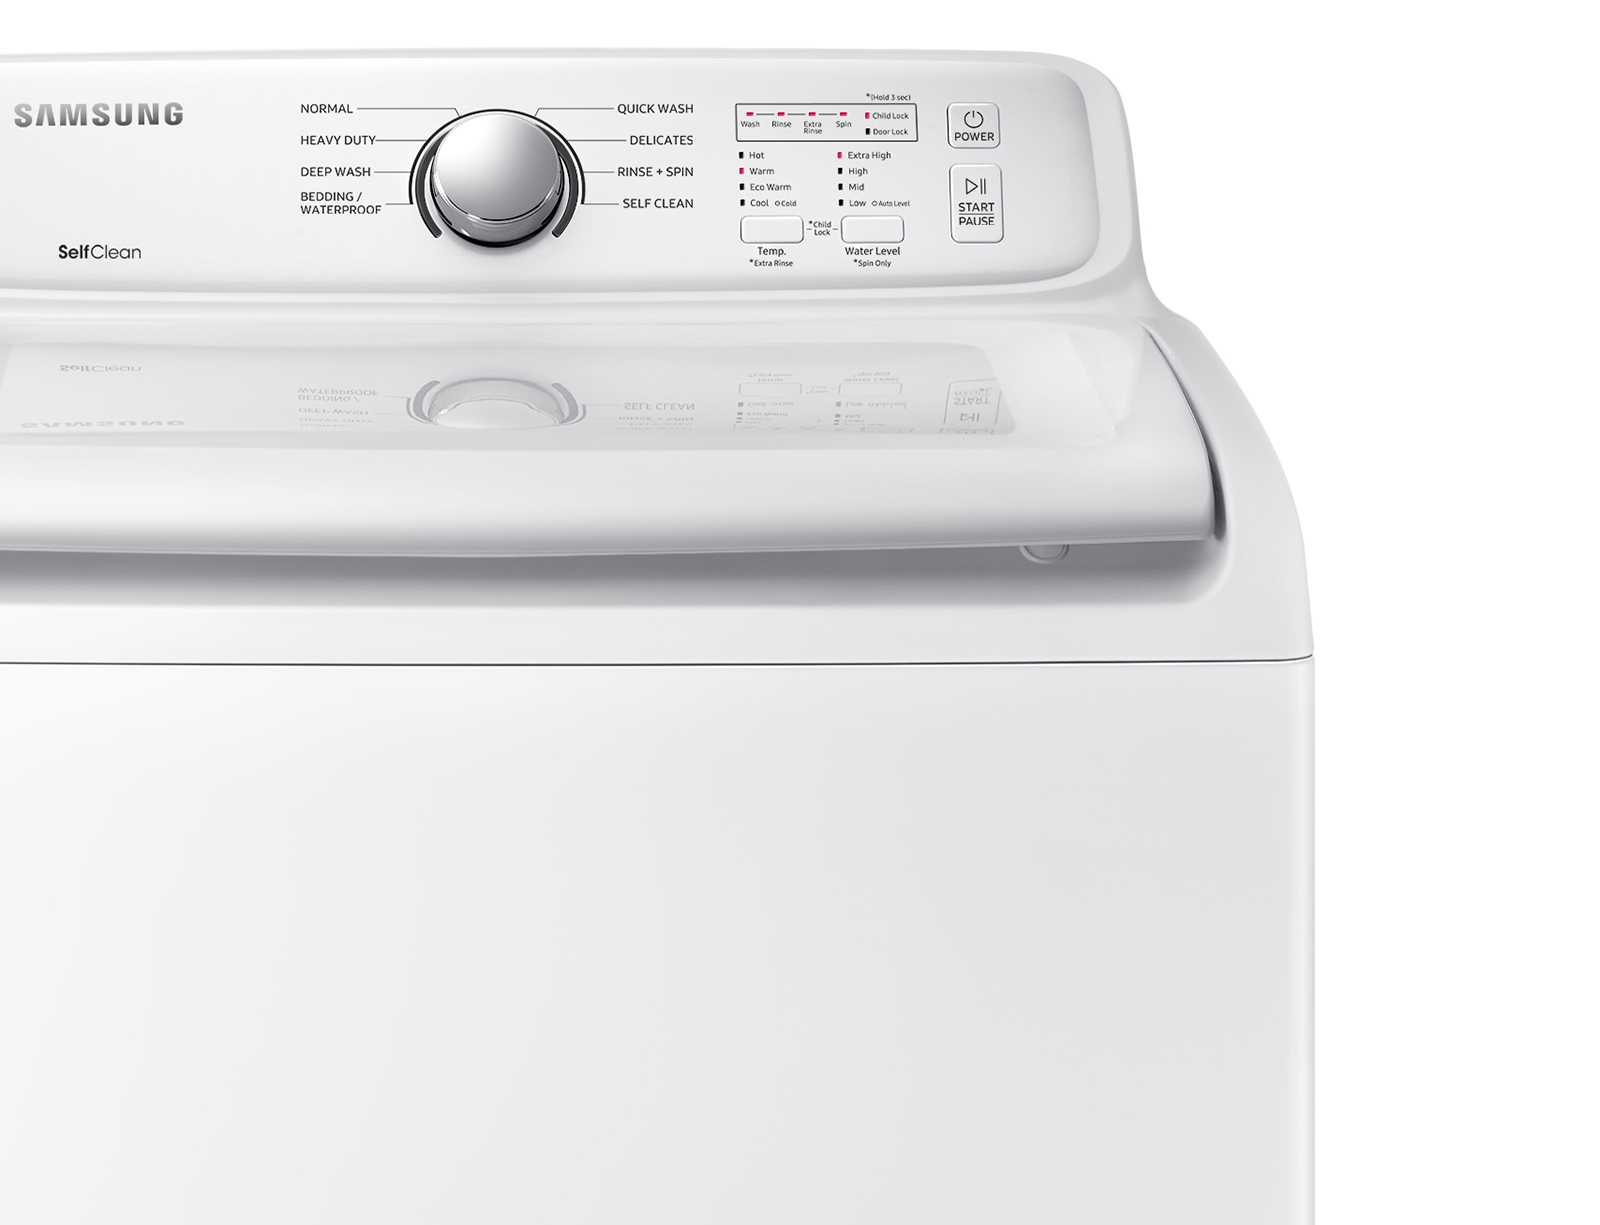 https://image-us.samsung.com/SamsungUS/home/home-appliances/washers/top-load/pd/wa45n3050aw/gallery/WA45N3050AW_gallery_03.jpg?$product-details-jpg$